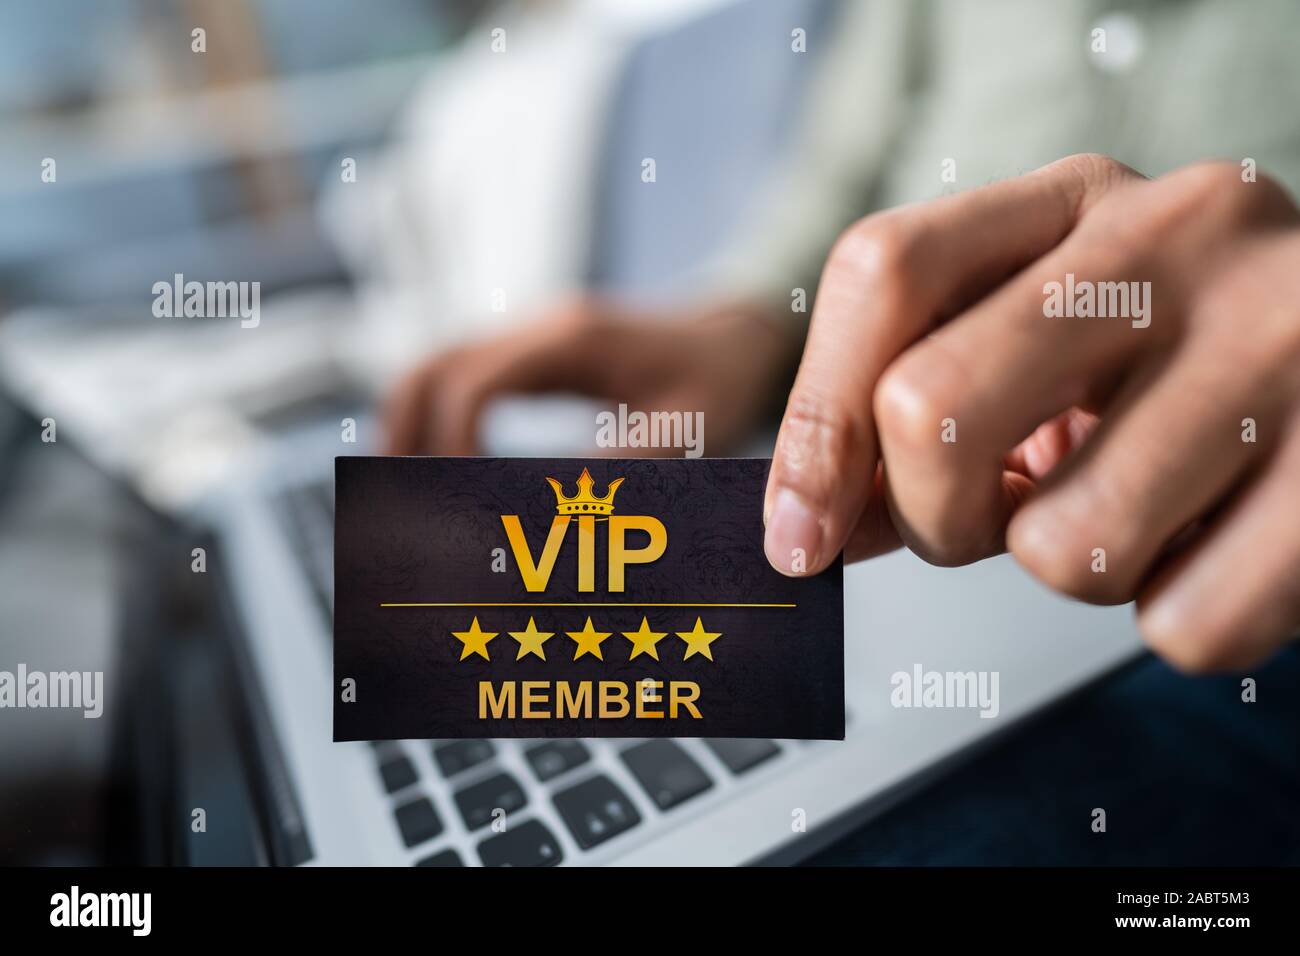 Close-up of a person's Hand Holding Laptop membre VIP Card Banque D'Images